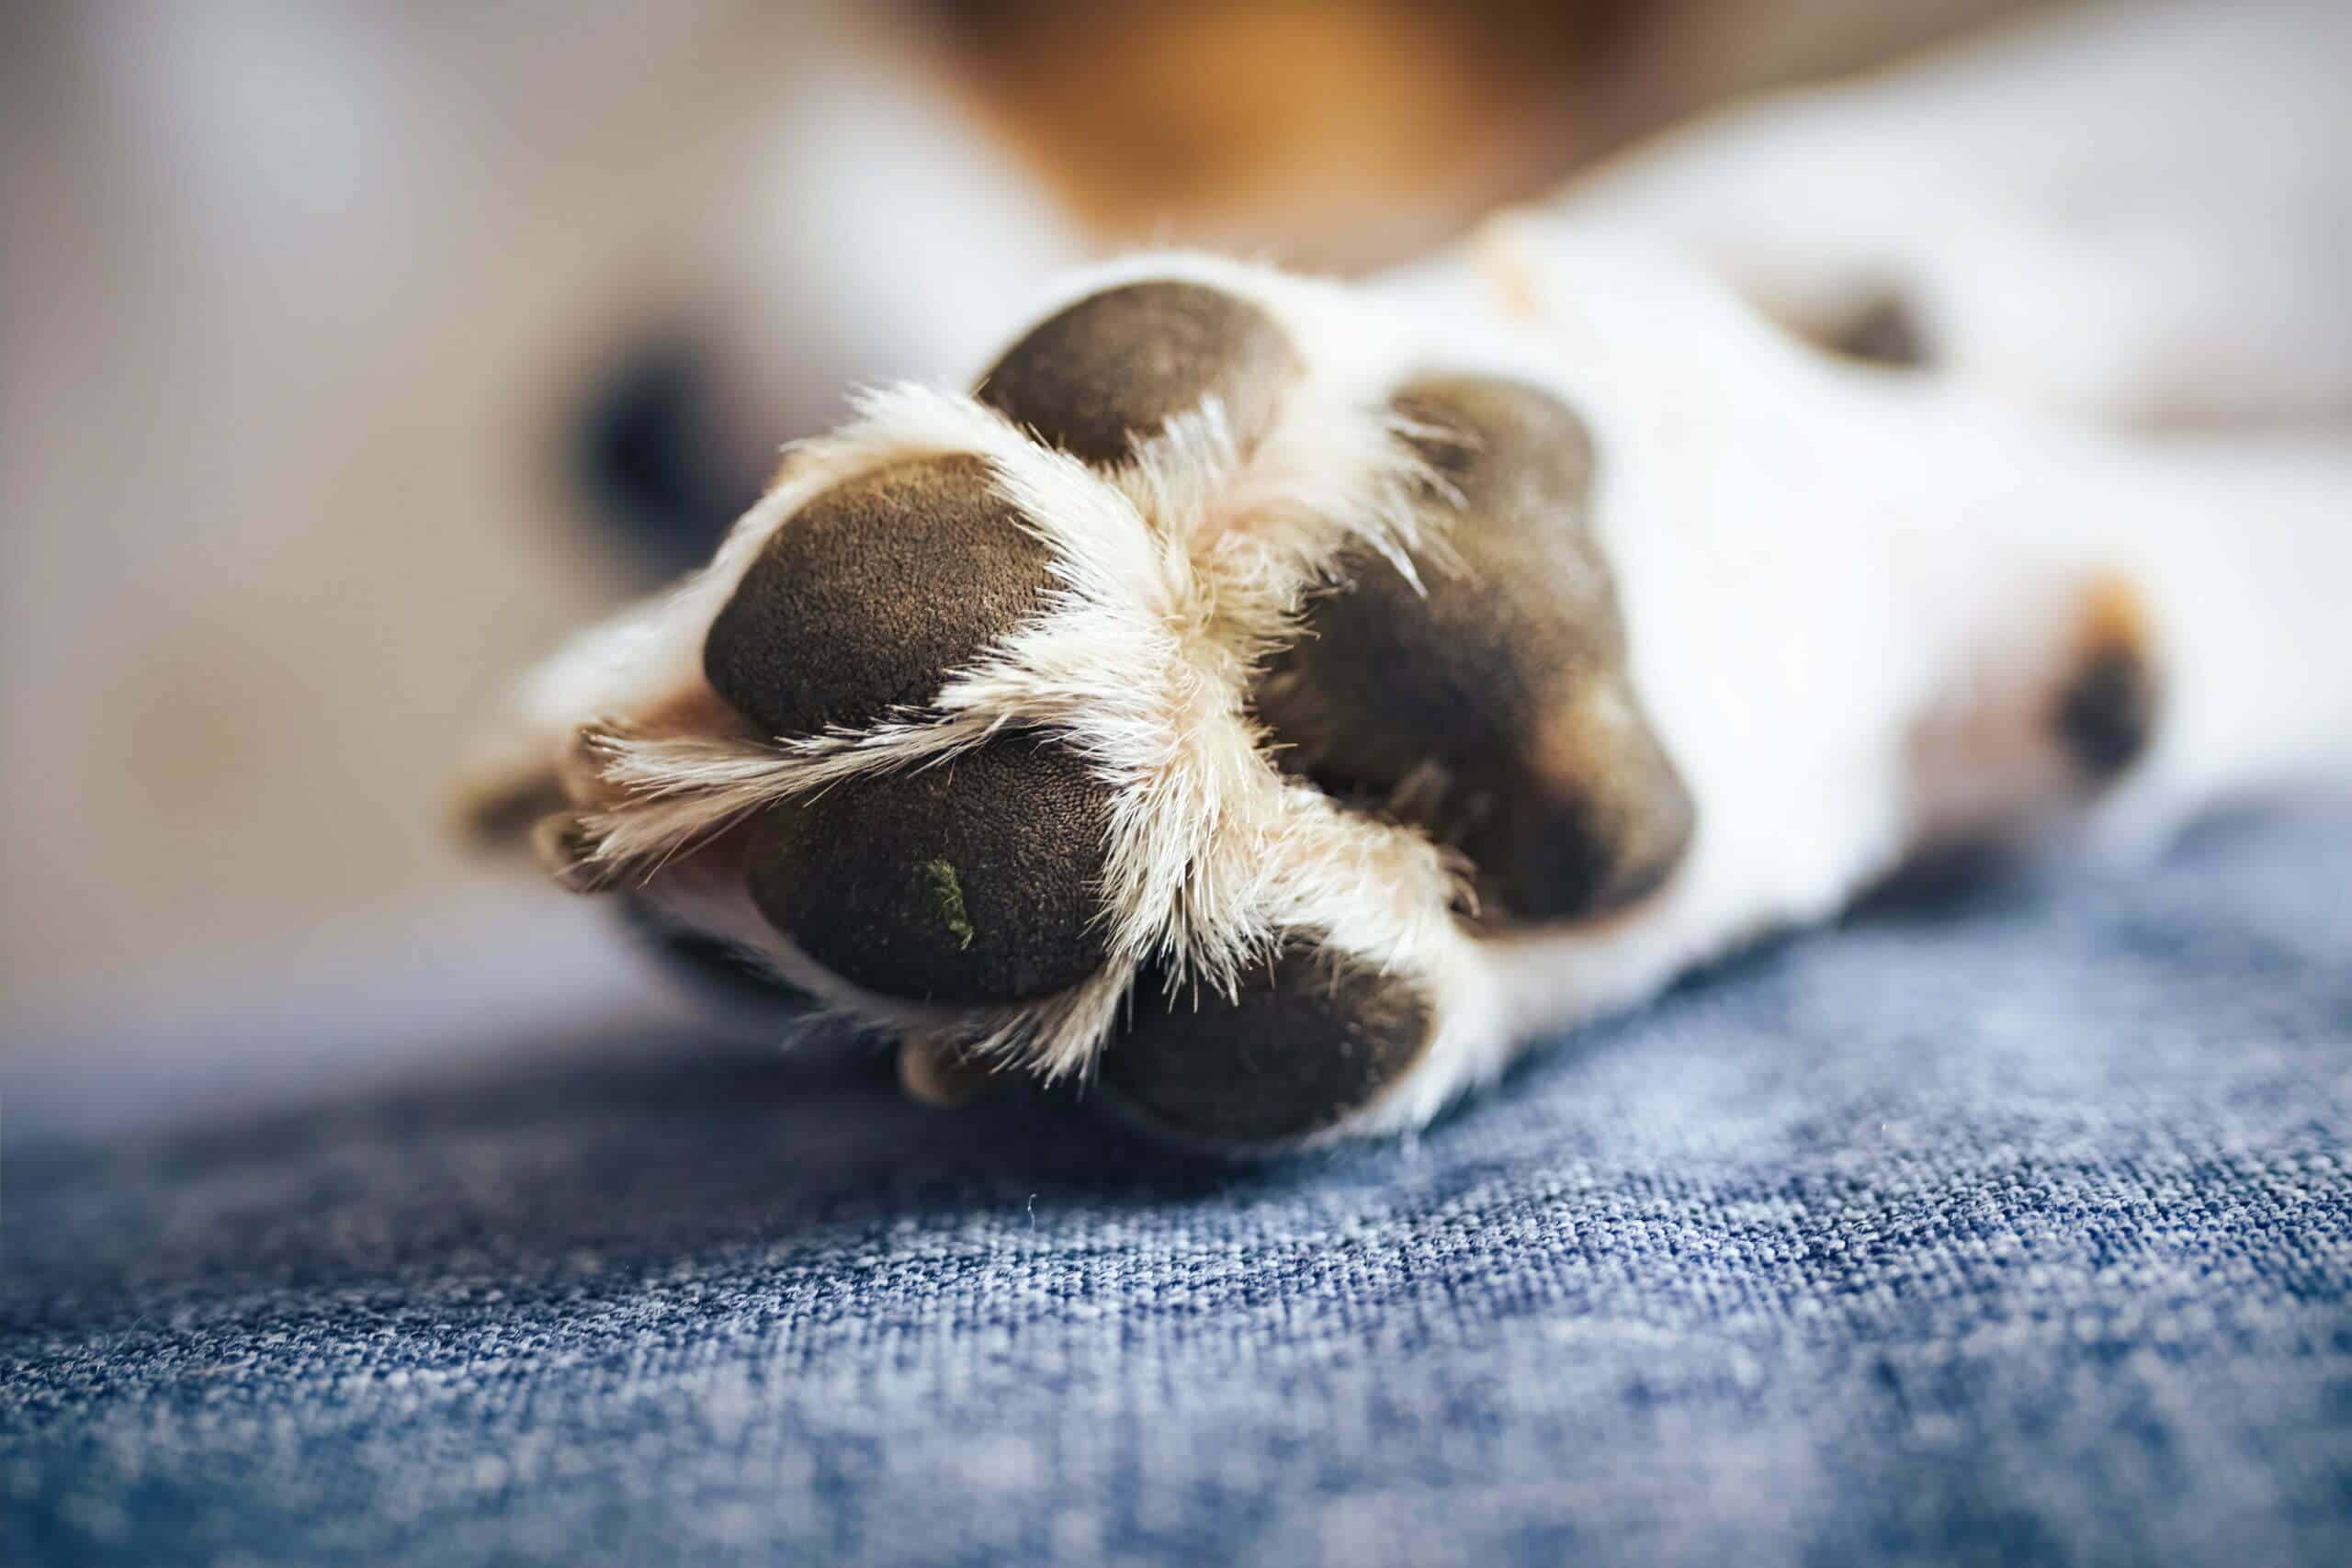 Additional tips when removing tar from your dog's paws